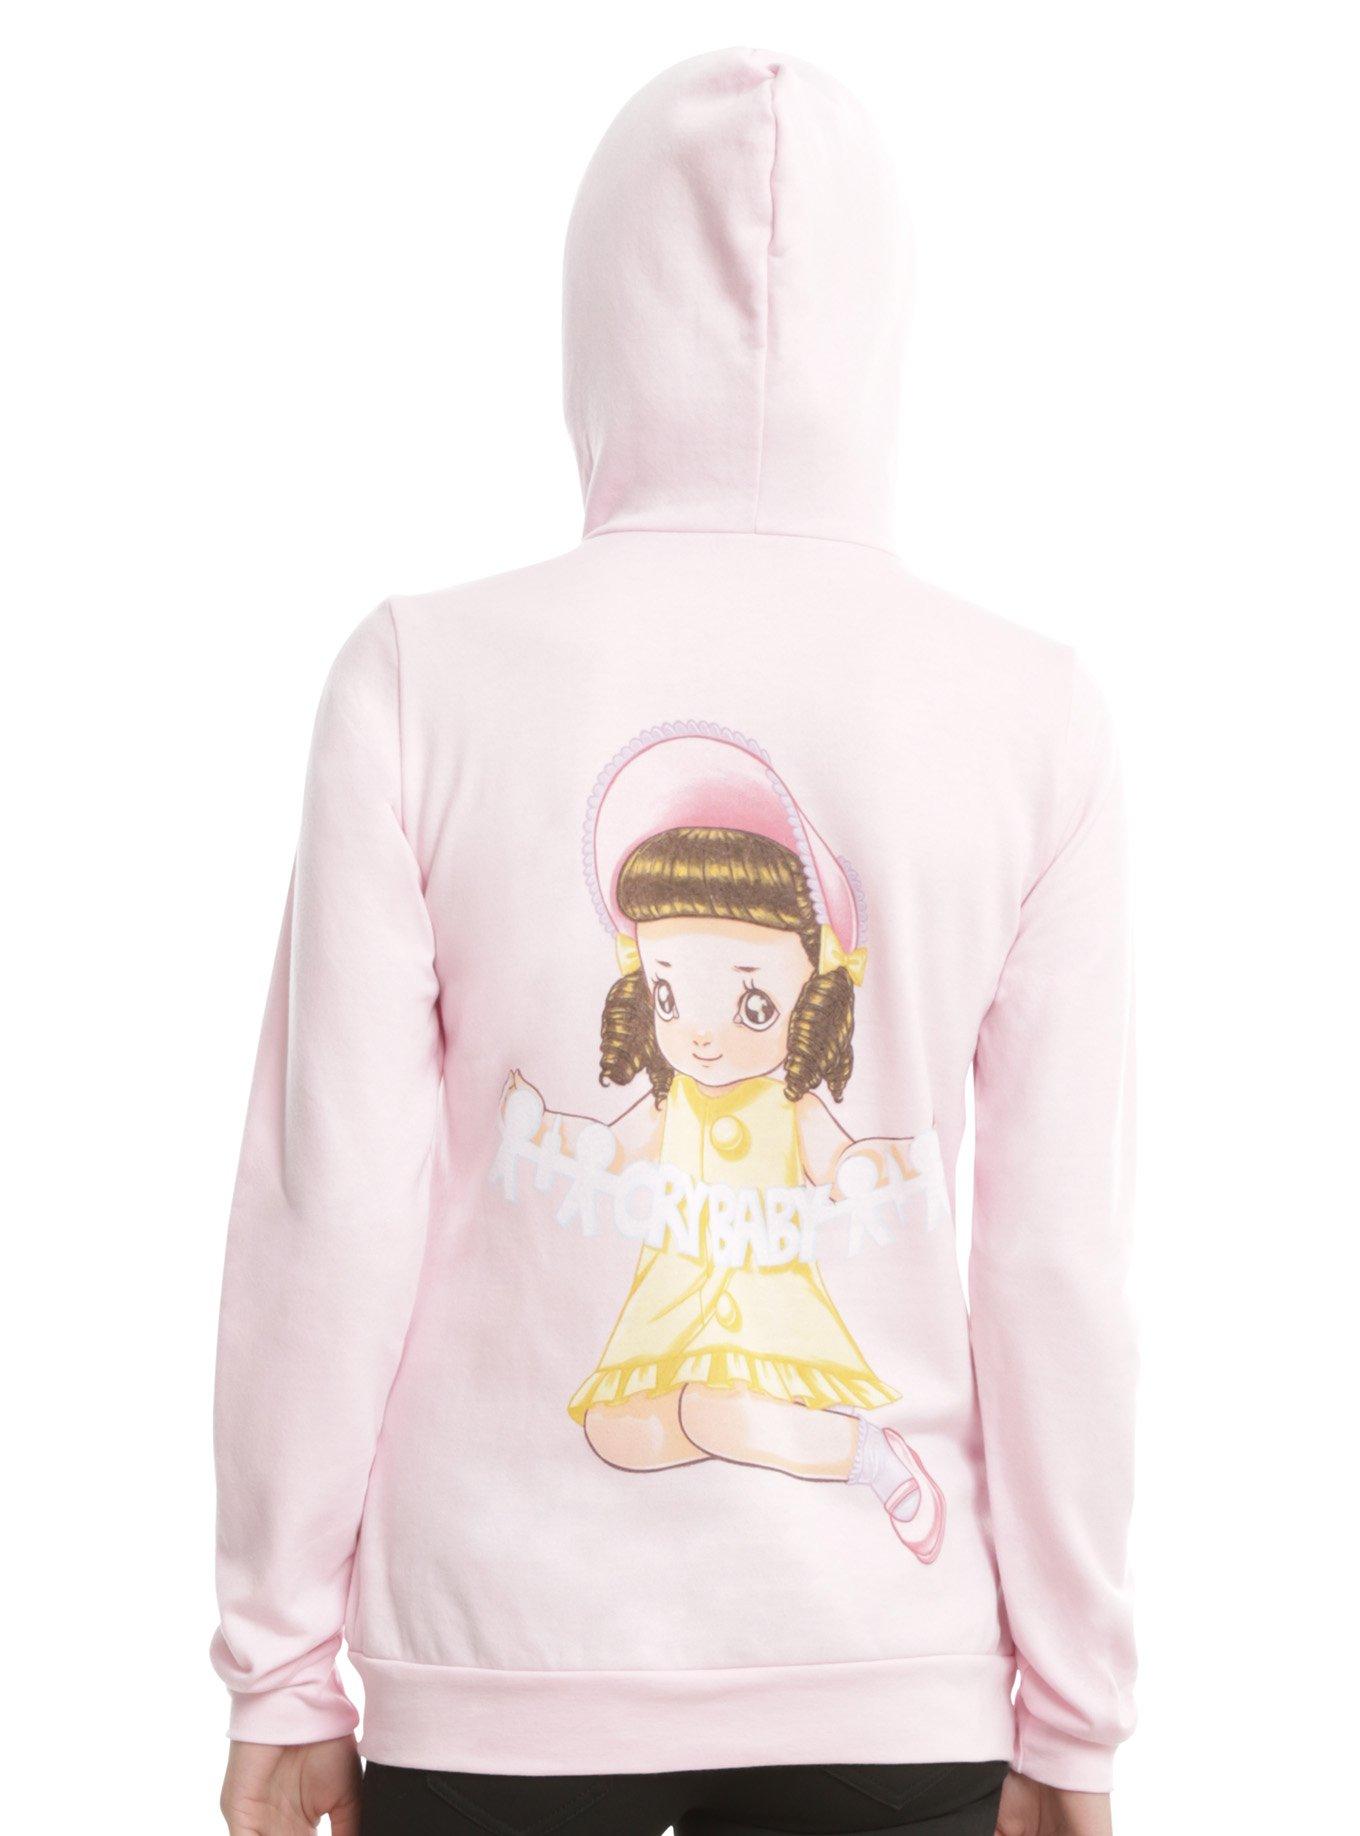 Hot Topic - Looking for Melanie Martinez merch? Dry those tears.